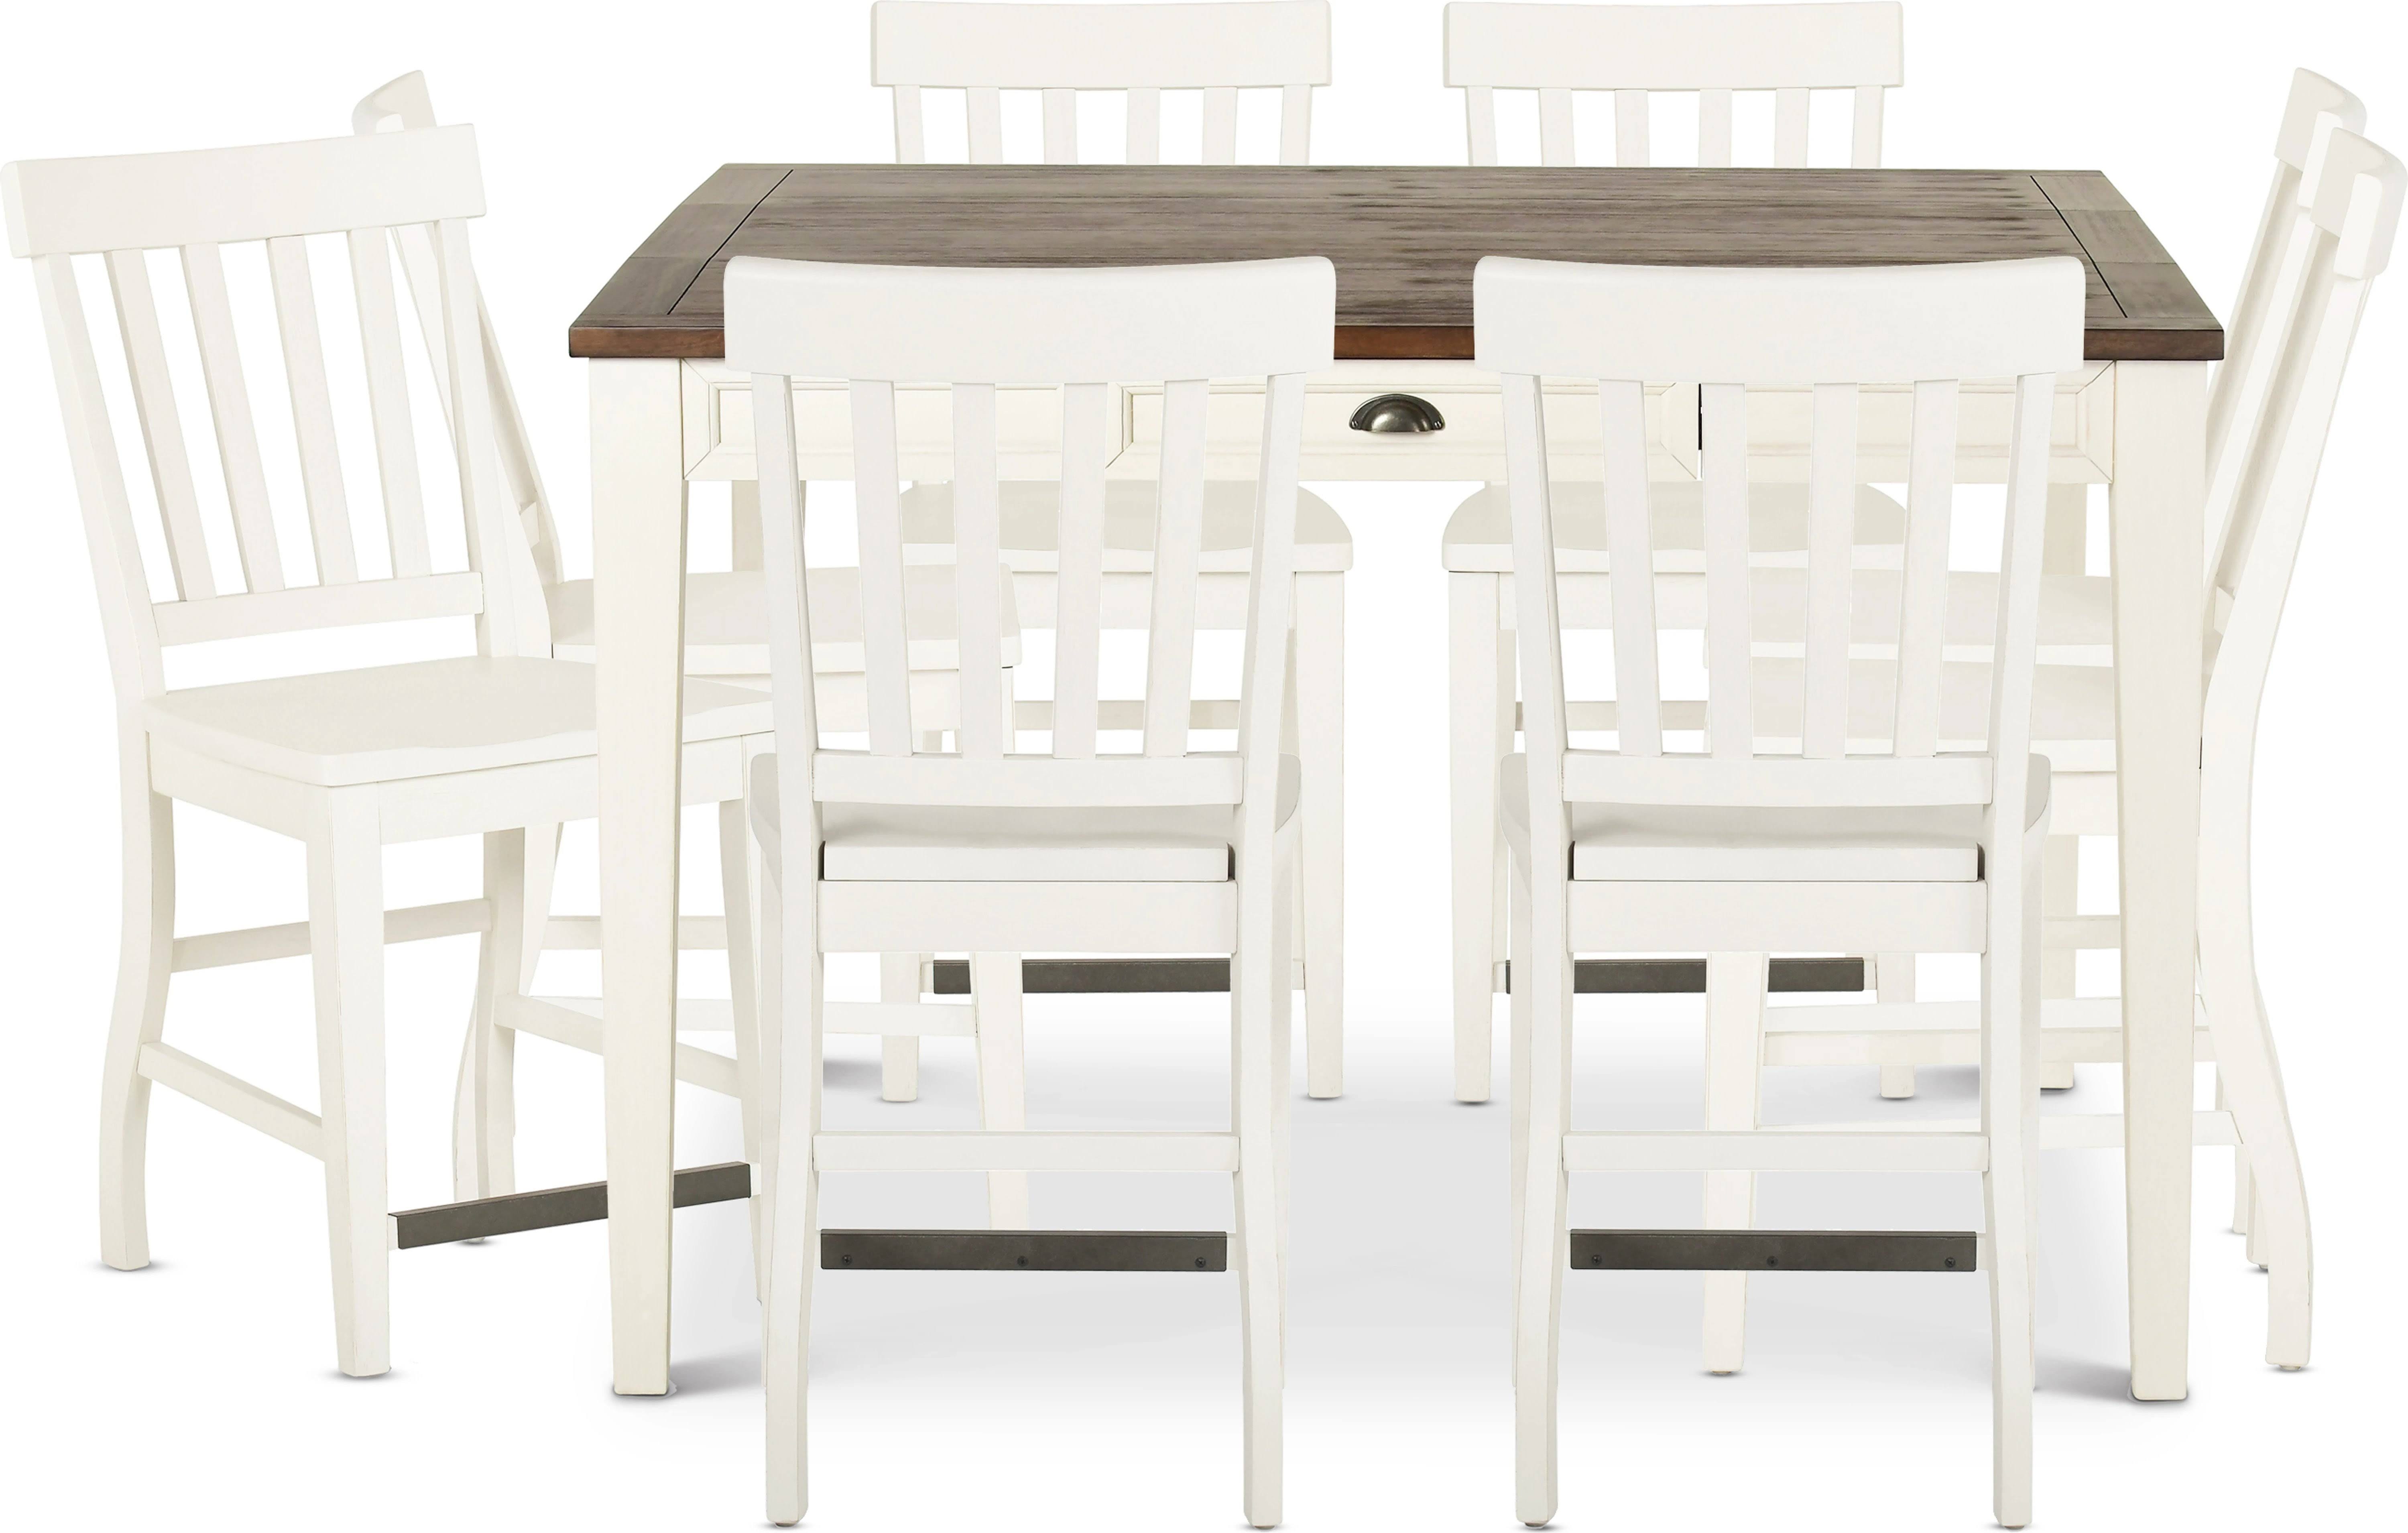 Impressive Farmhouse Cayla Counter Height Dining Set with Distressed Antique White Chairs | Image